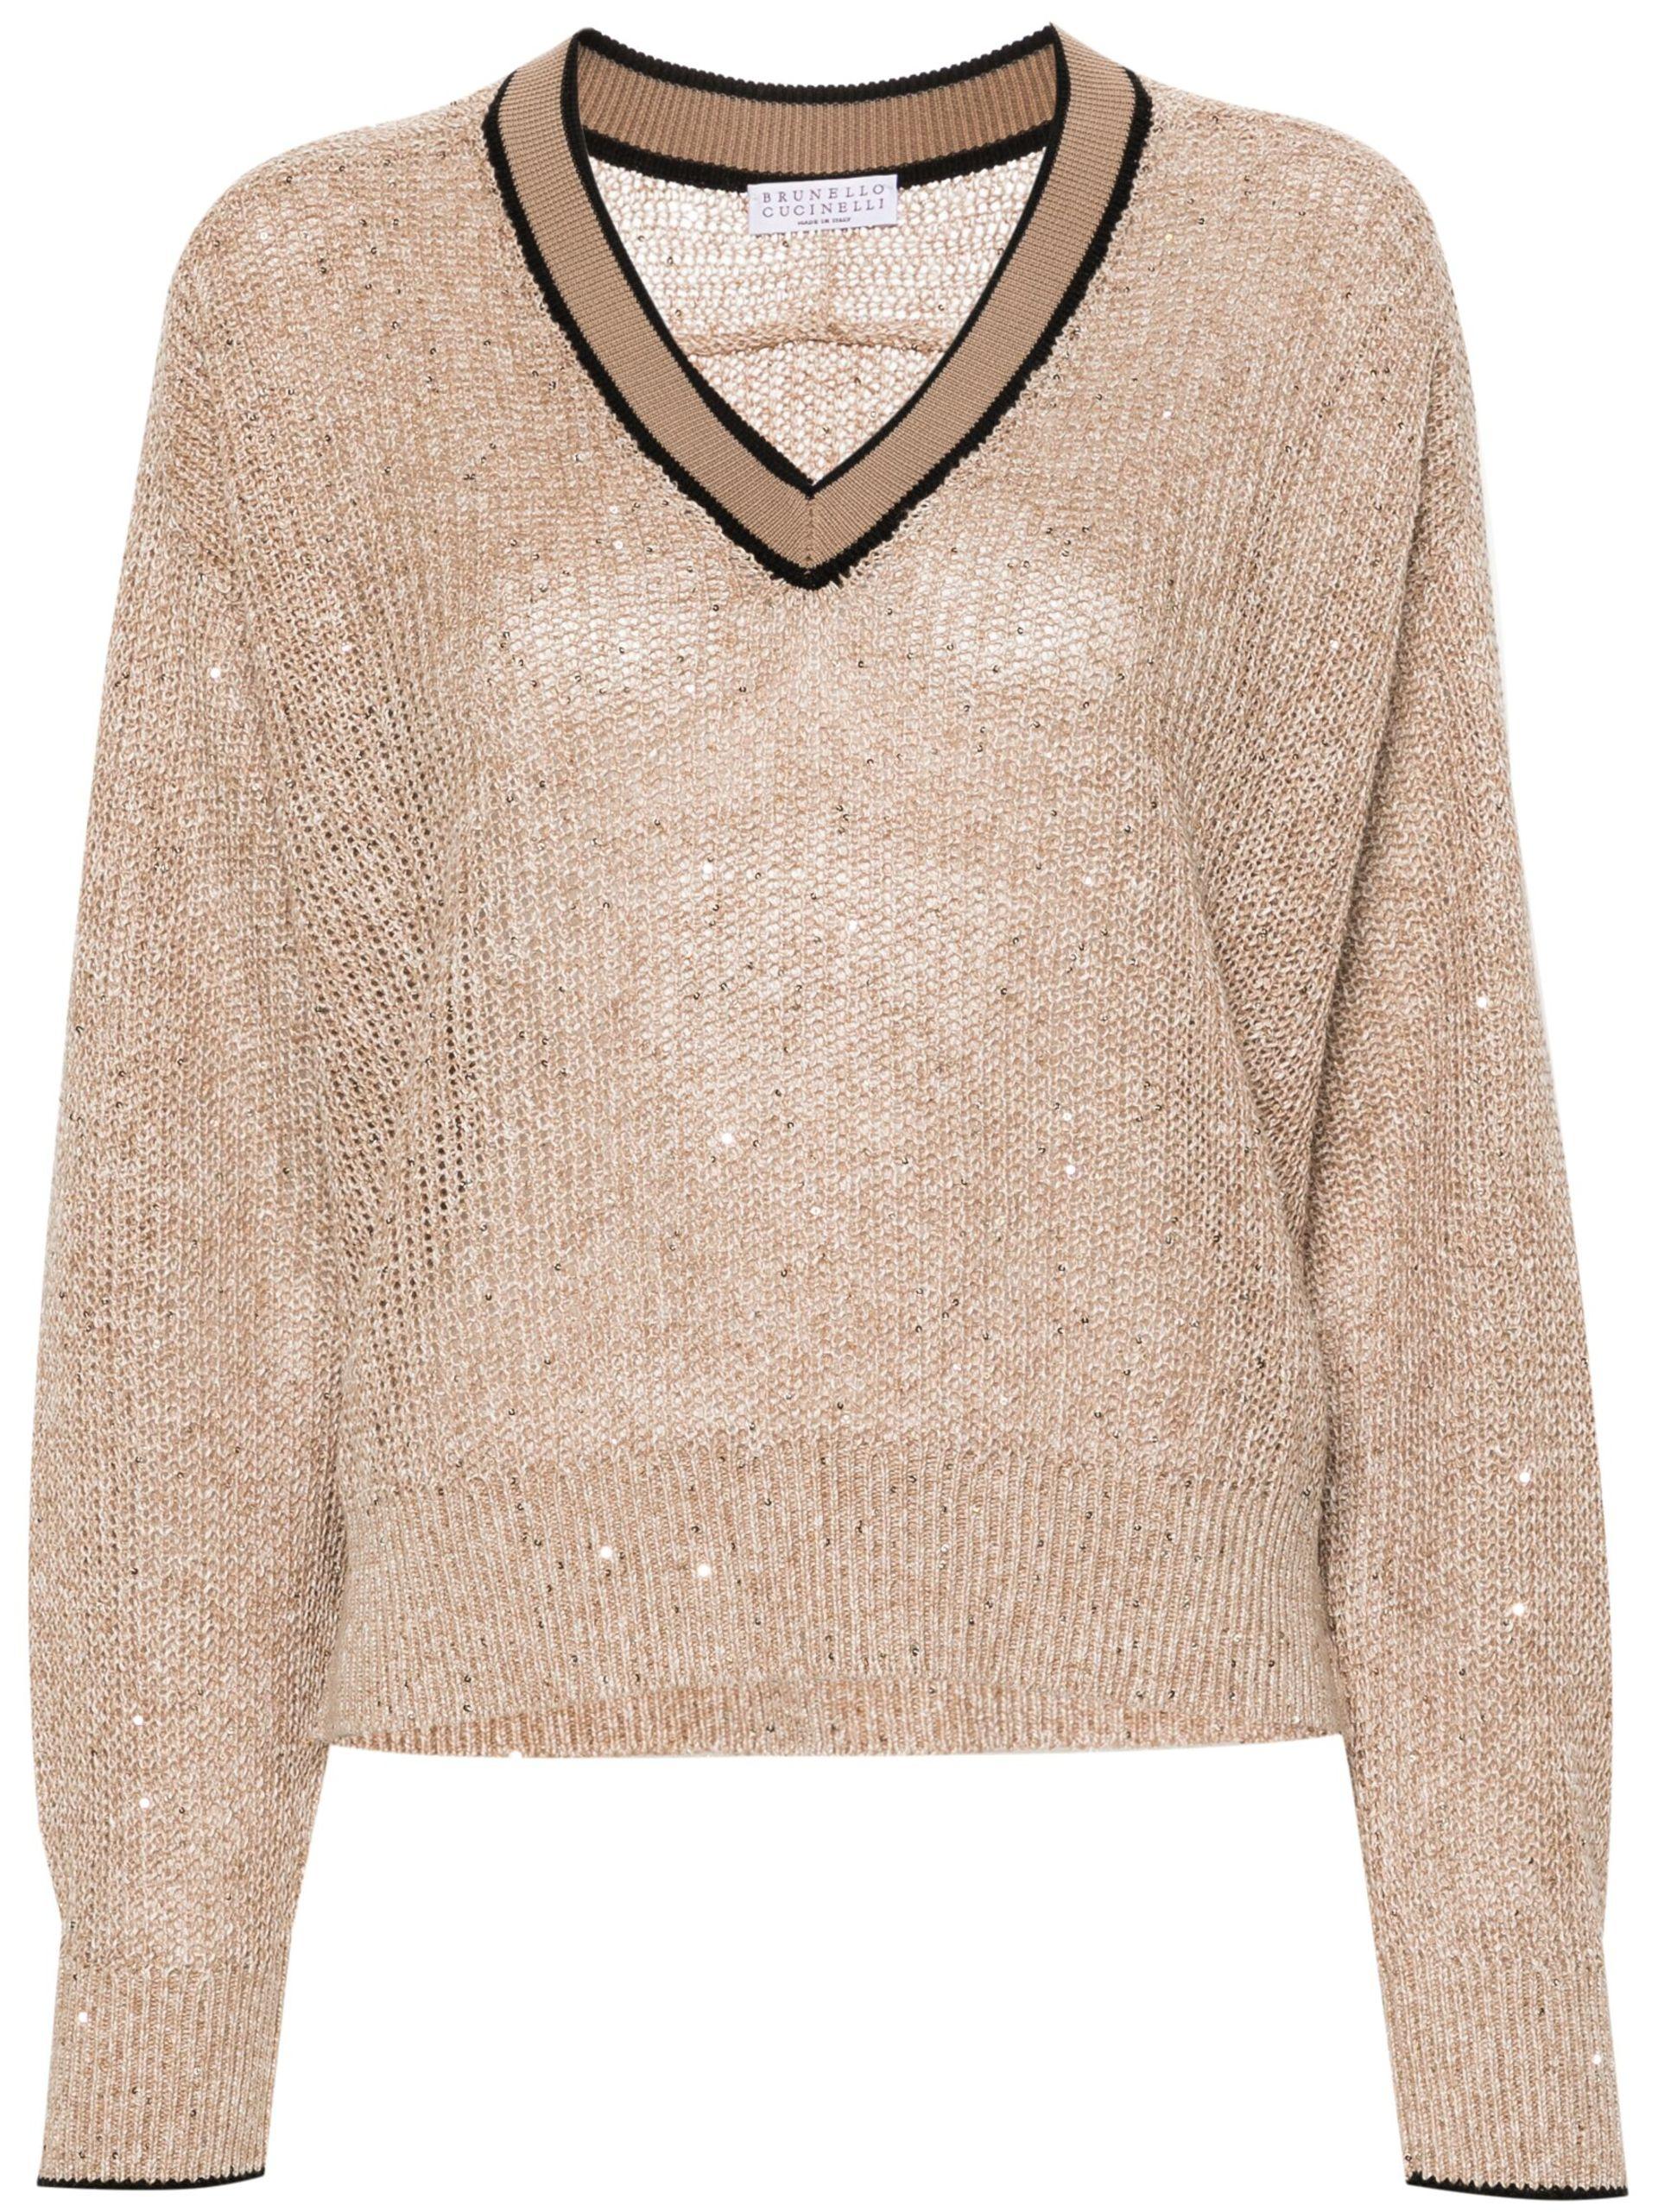 Brunello Cucinelli sequin-embellished cable-knit sweater - Neutrals